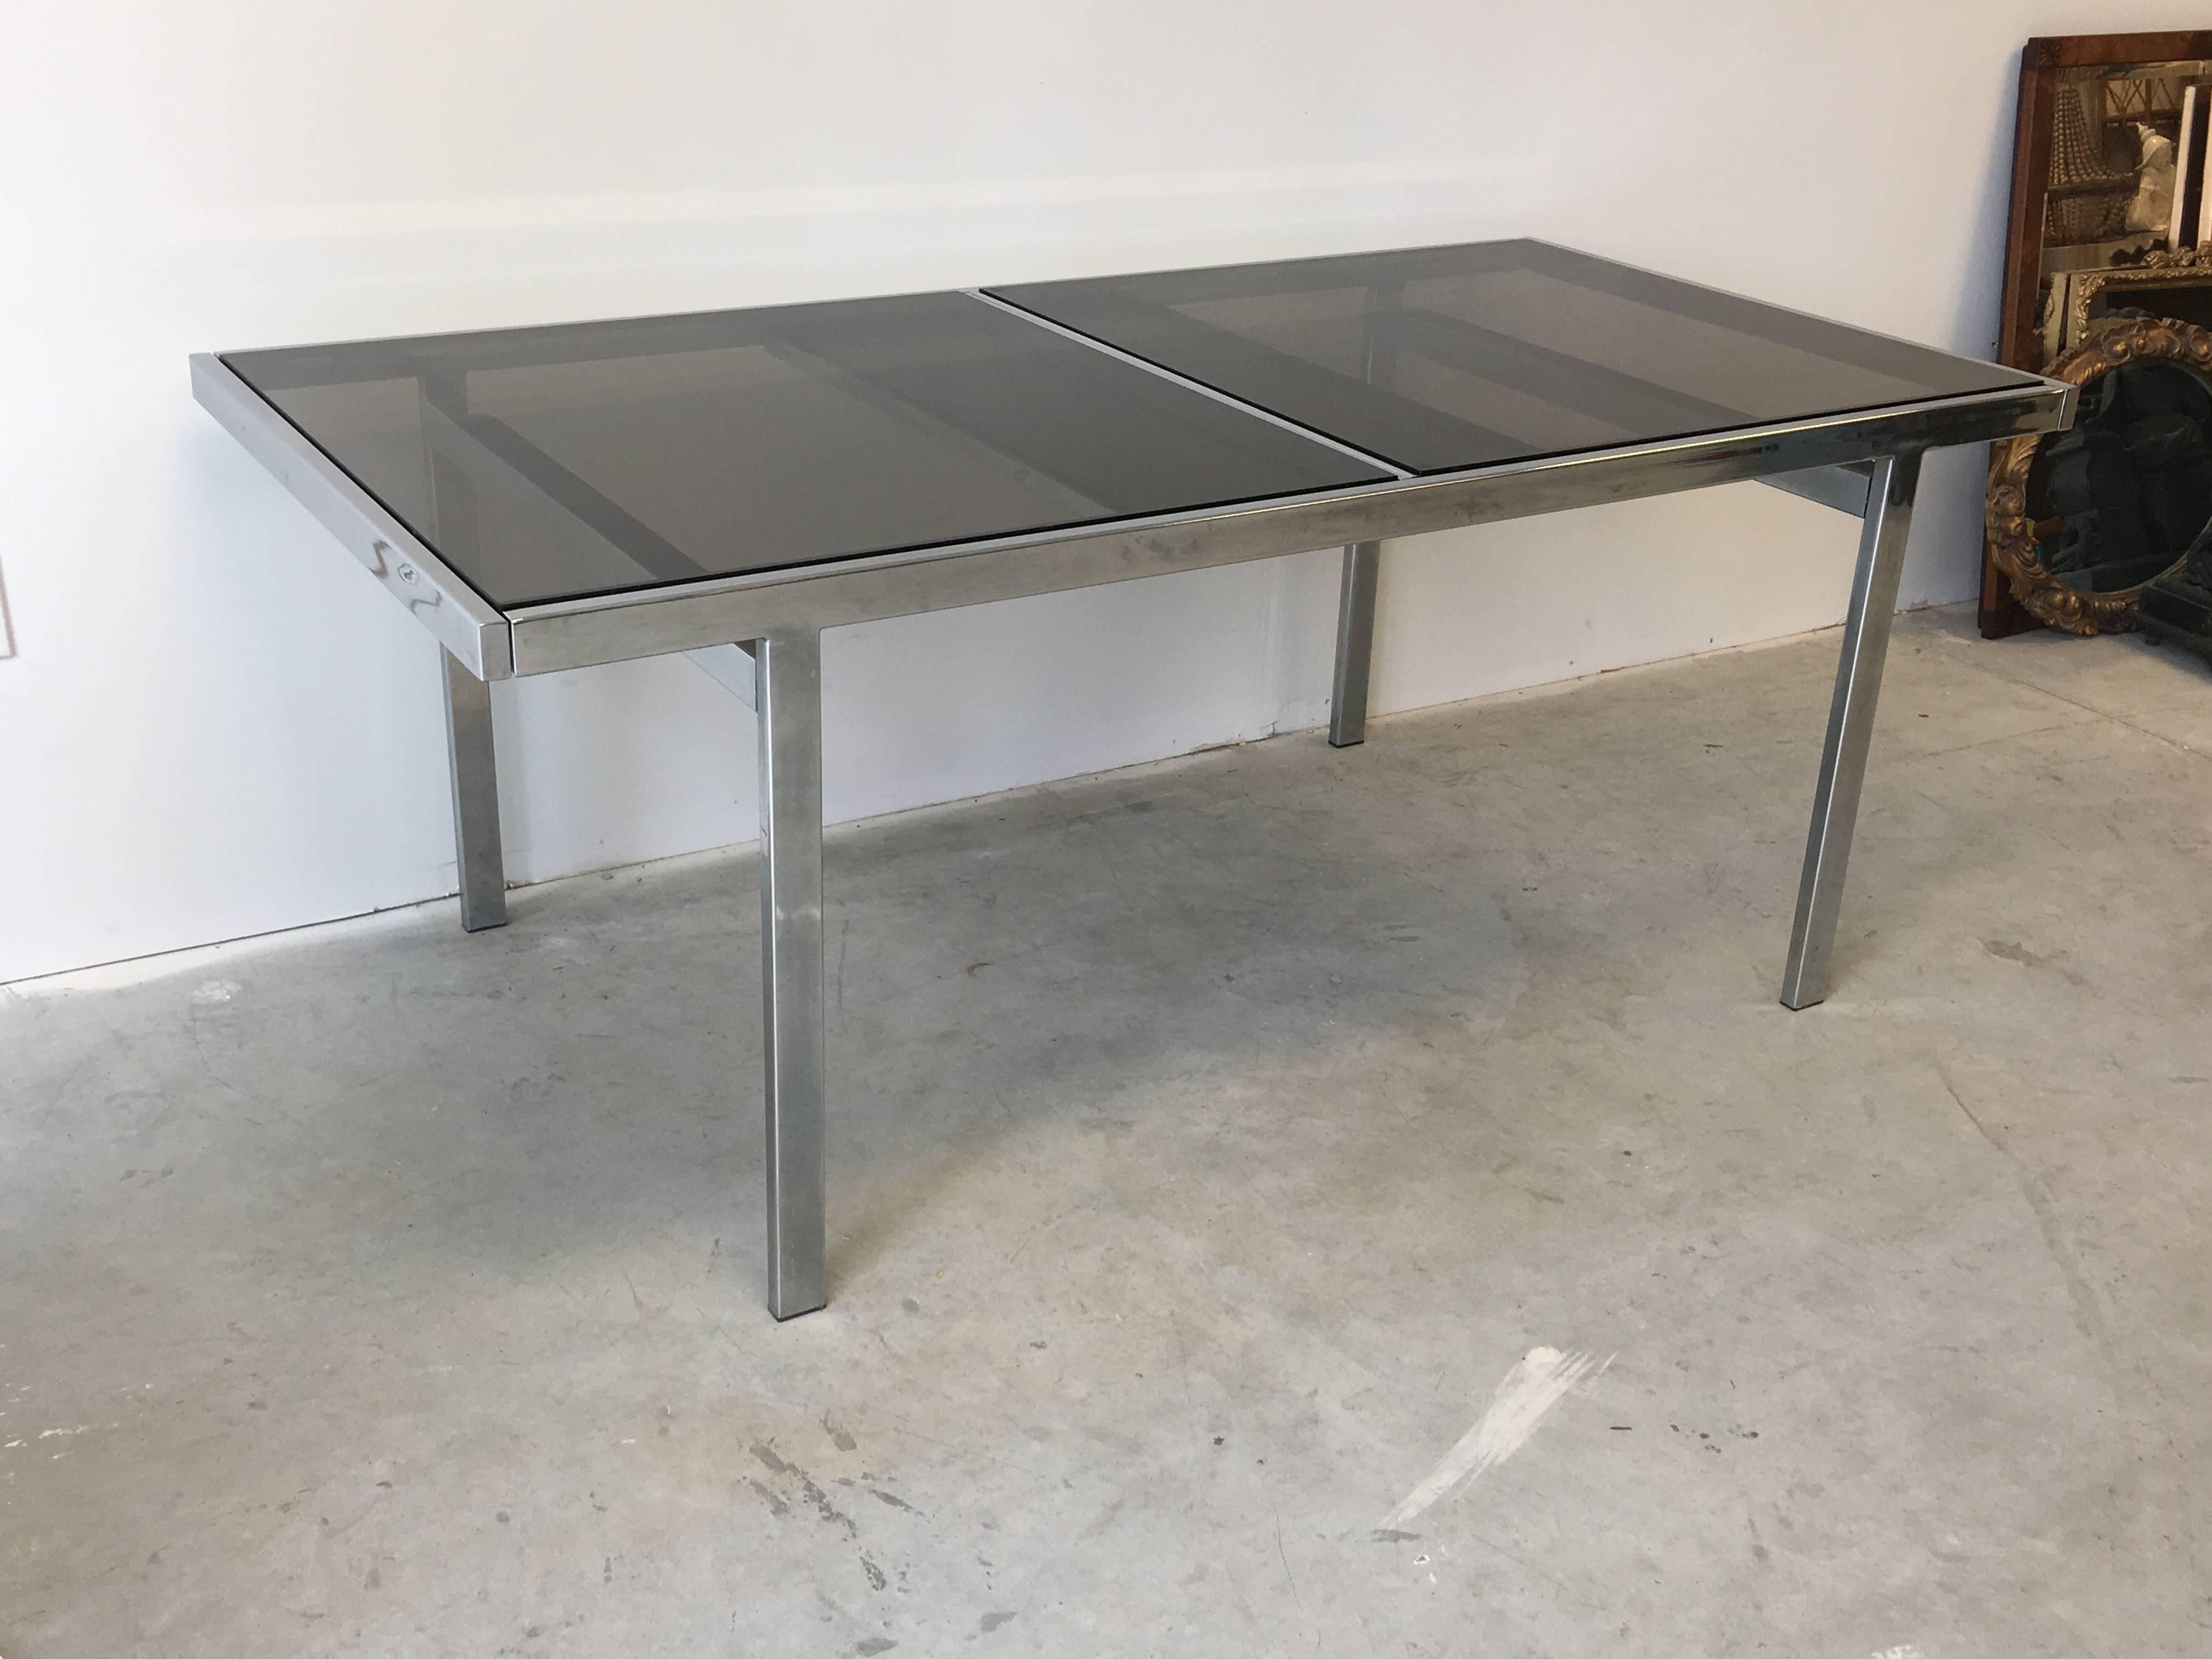 Offered is an absolutely stunning, Mid-Century Modern 1970s Milo Baughman chrome dining table with three smoked glass panes. This table extends from both sides, revealing a centre extension. Pull on each side to reveal the centre, which simply lifts